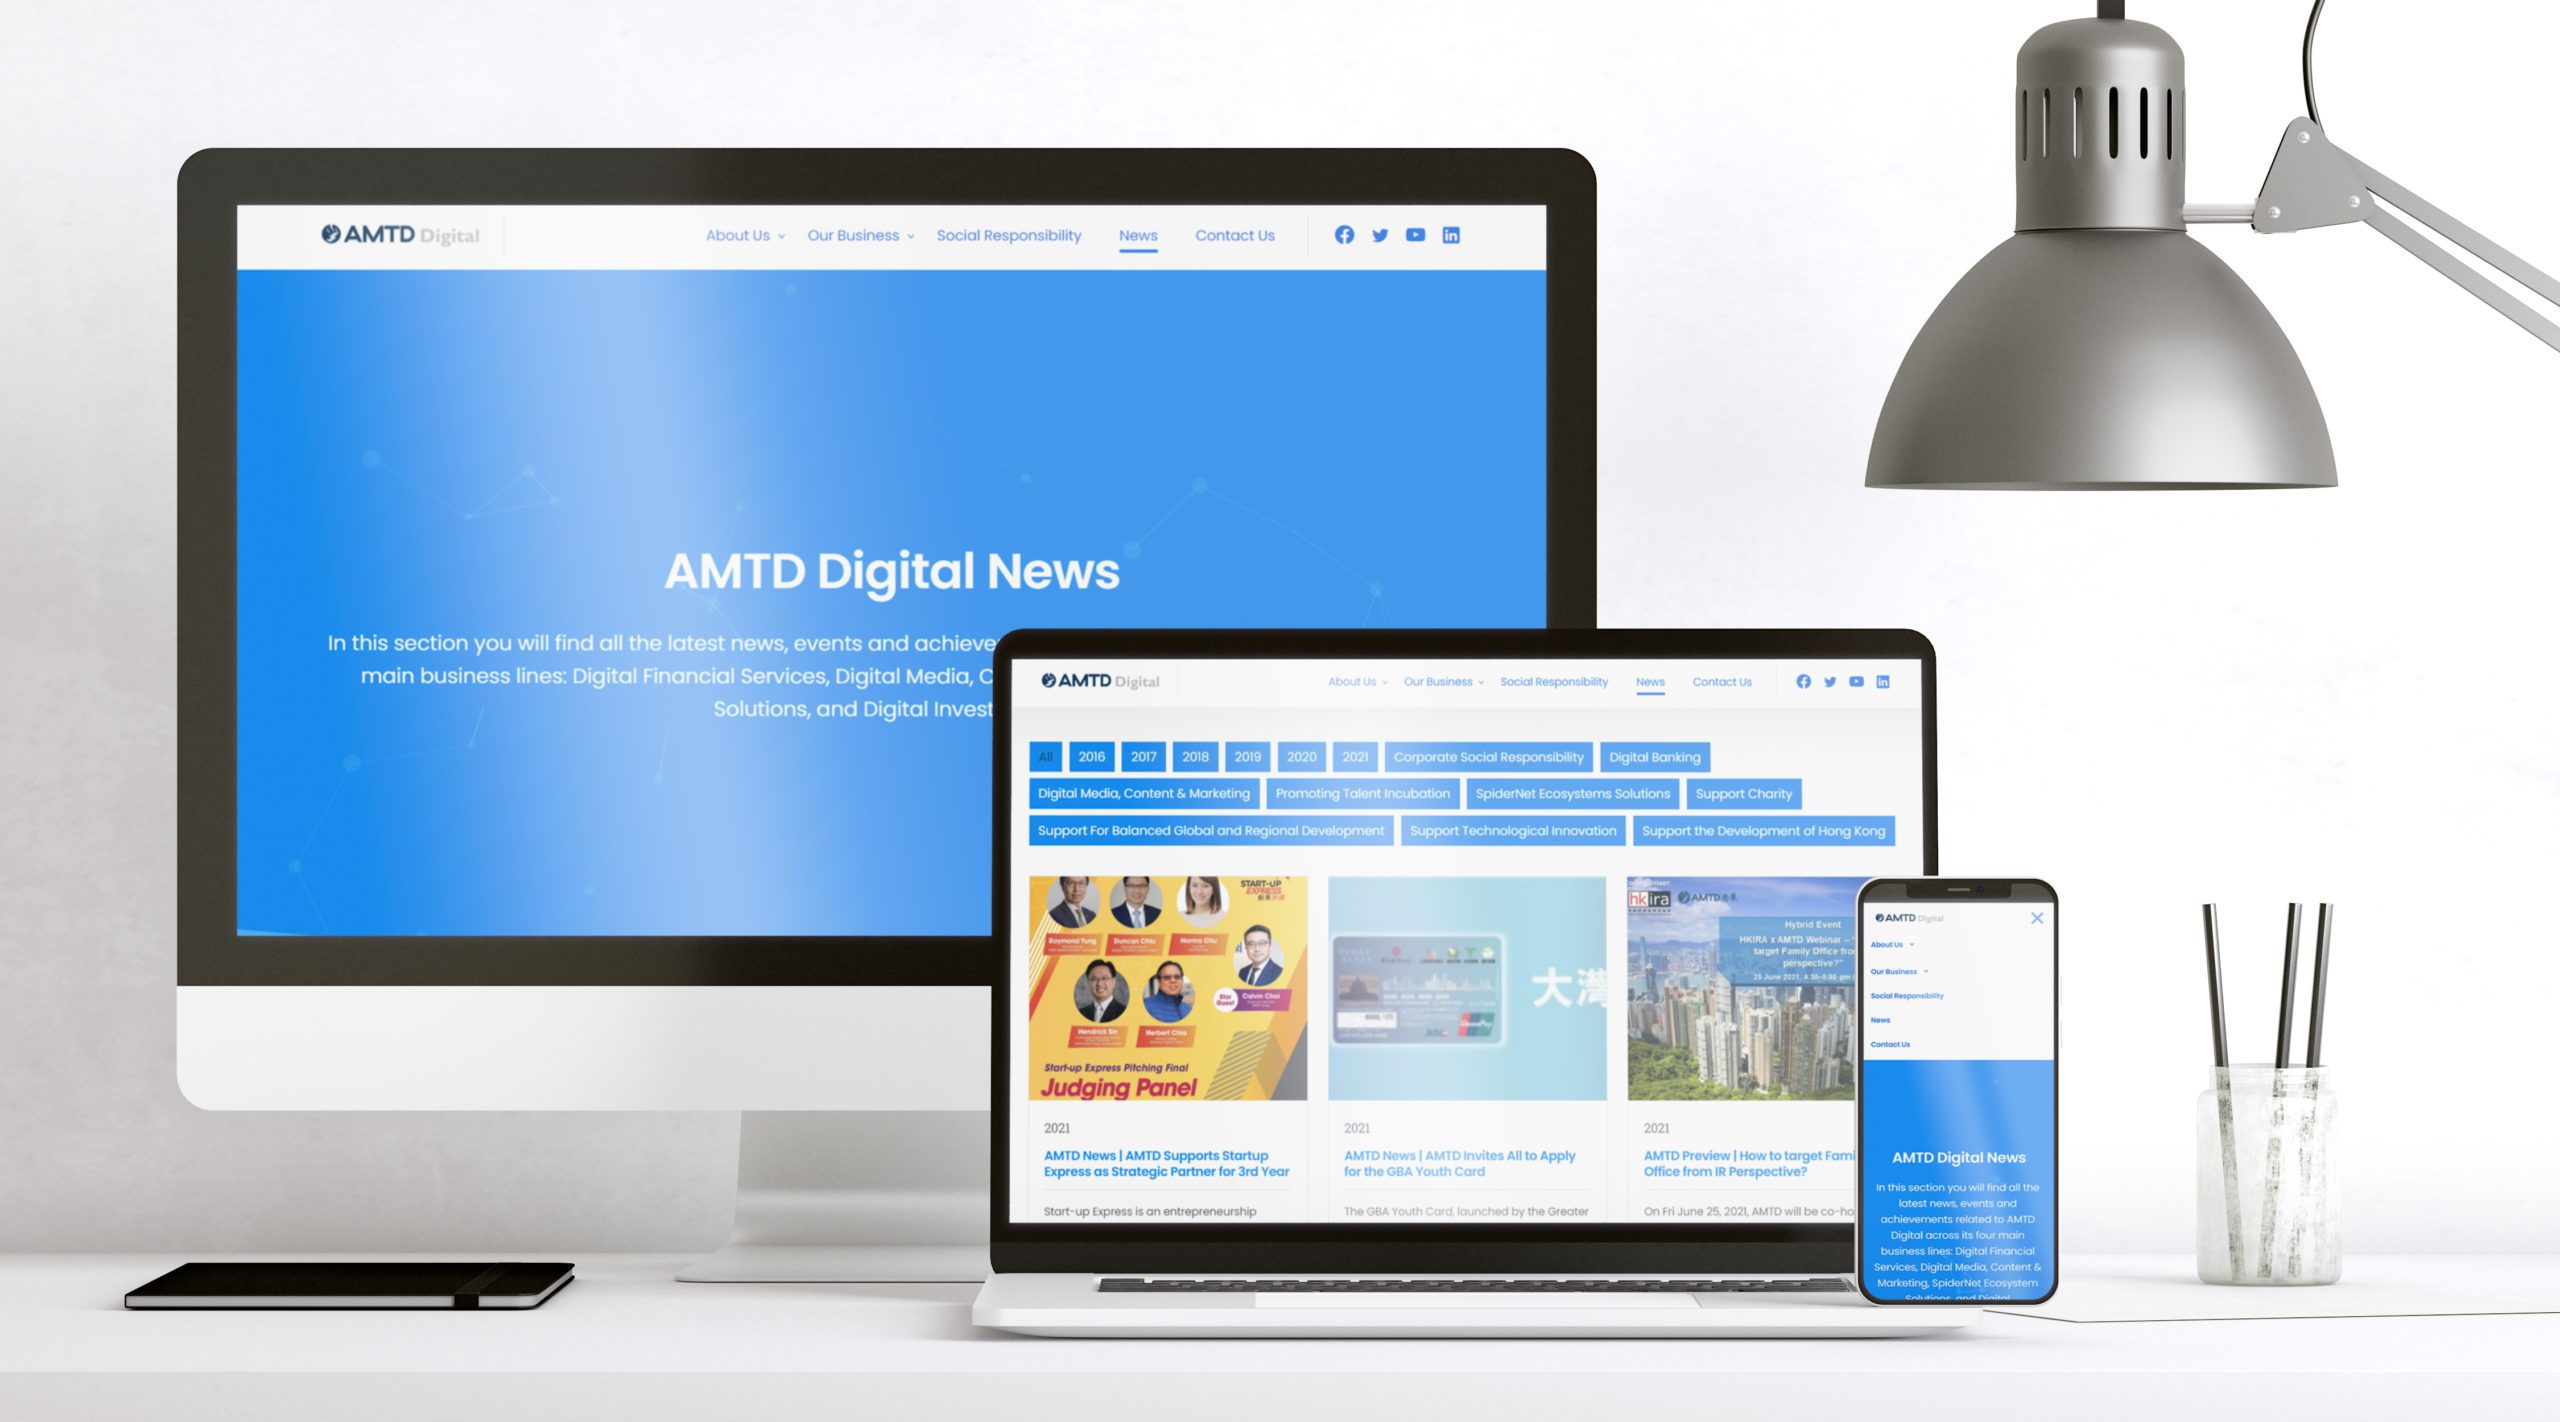 AMTD International website shown in various responsive devices with work desk background